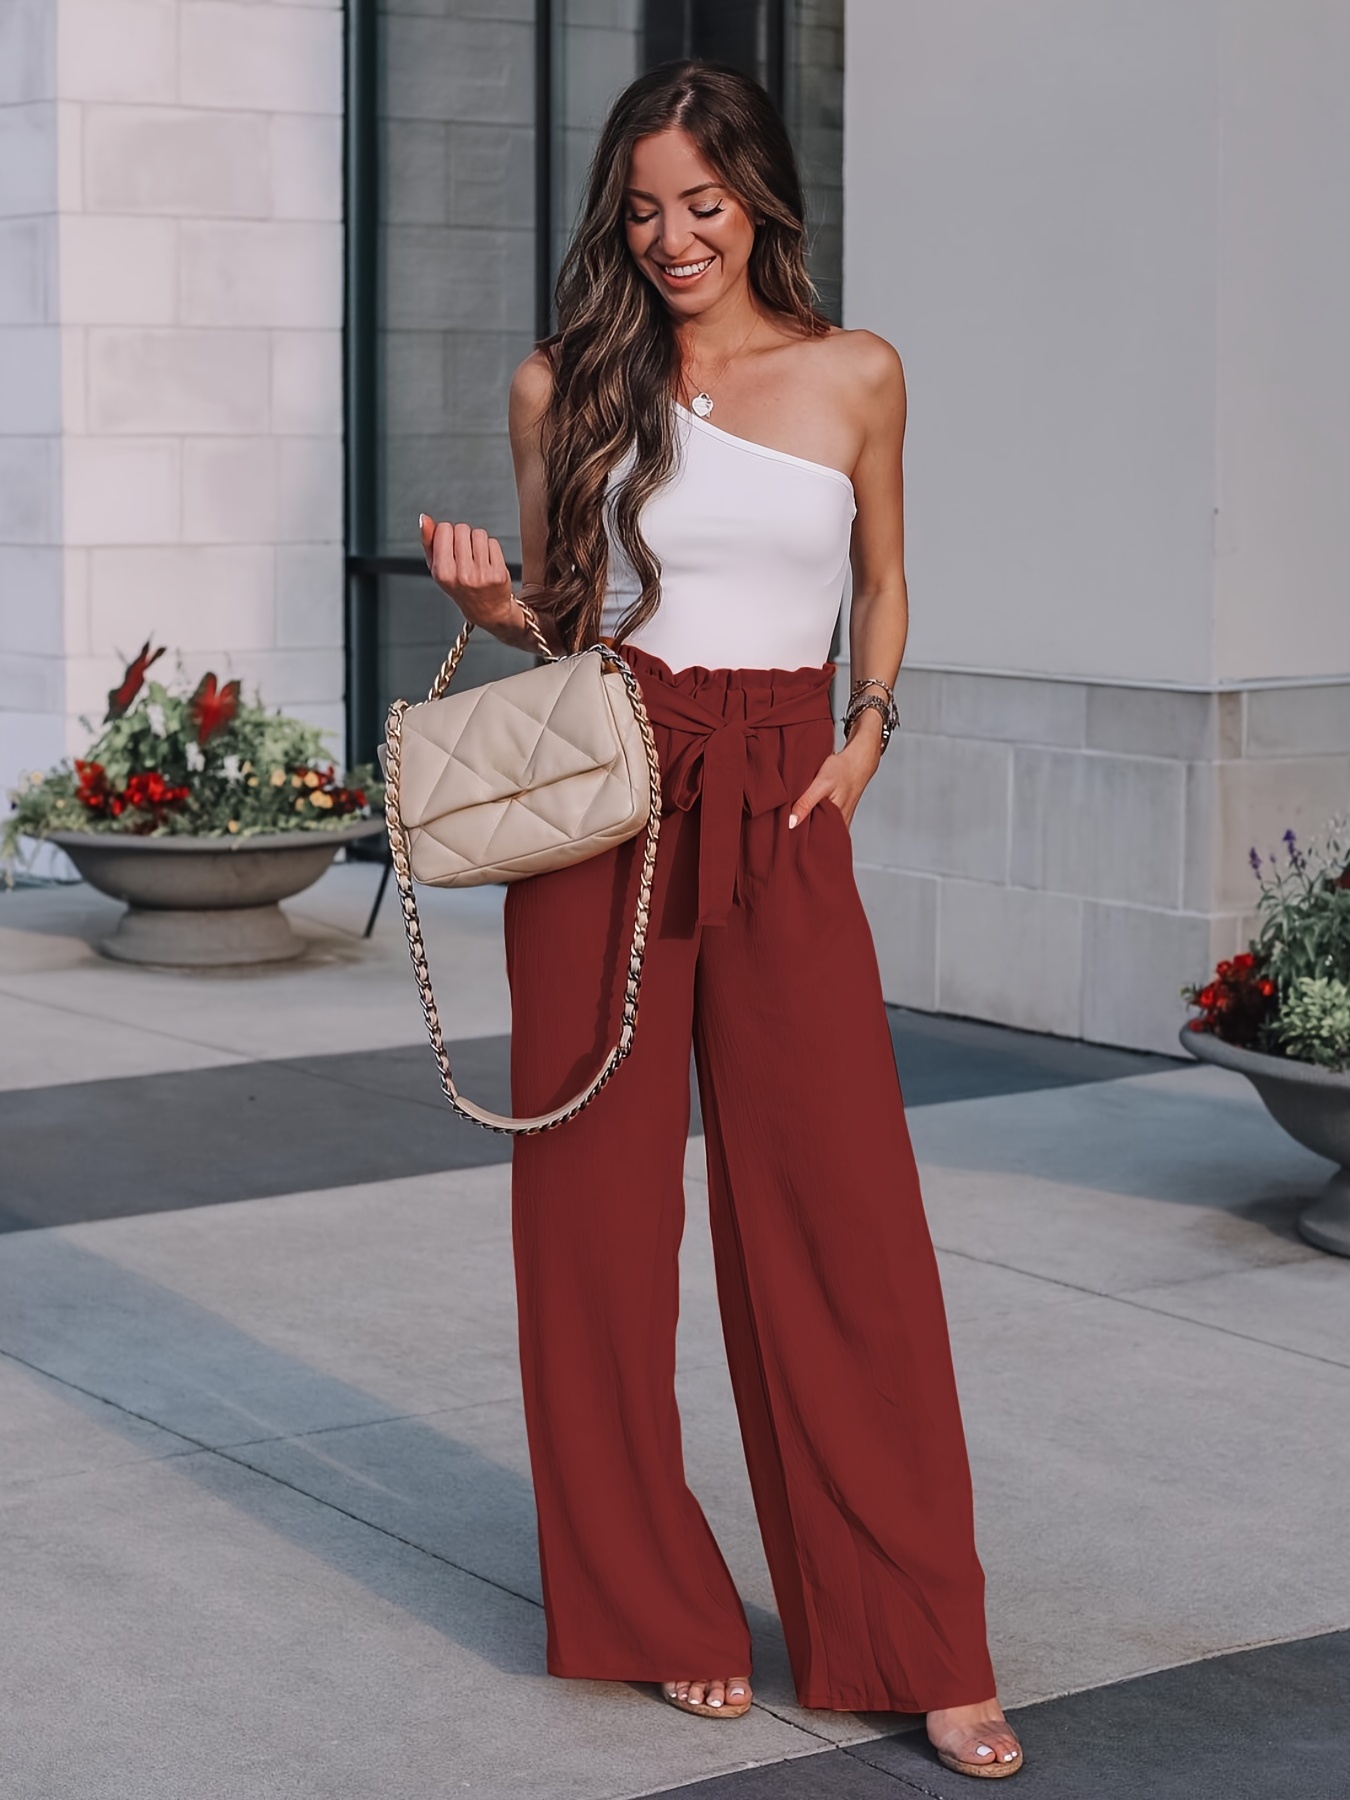 Wide Leg Palazzo Pants (Red)  Classy outfits, Chic outfits